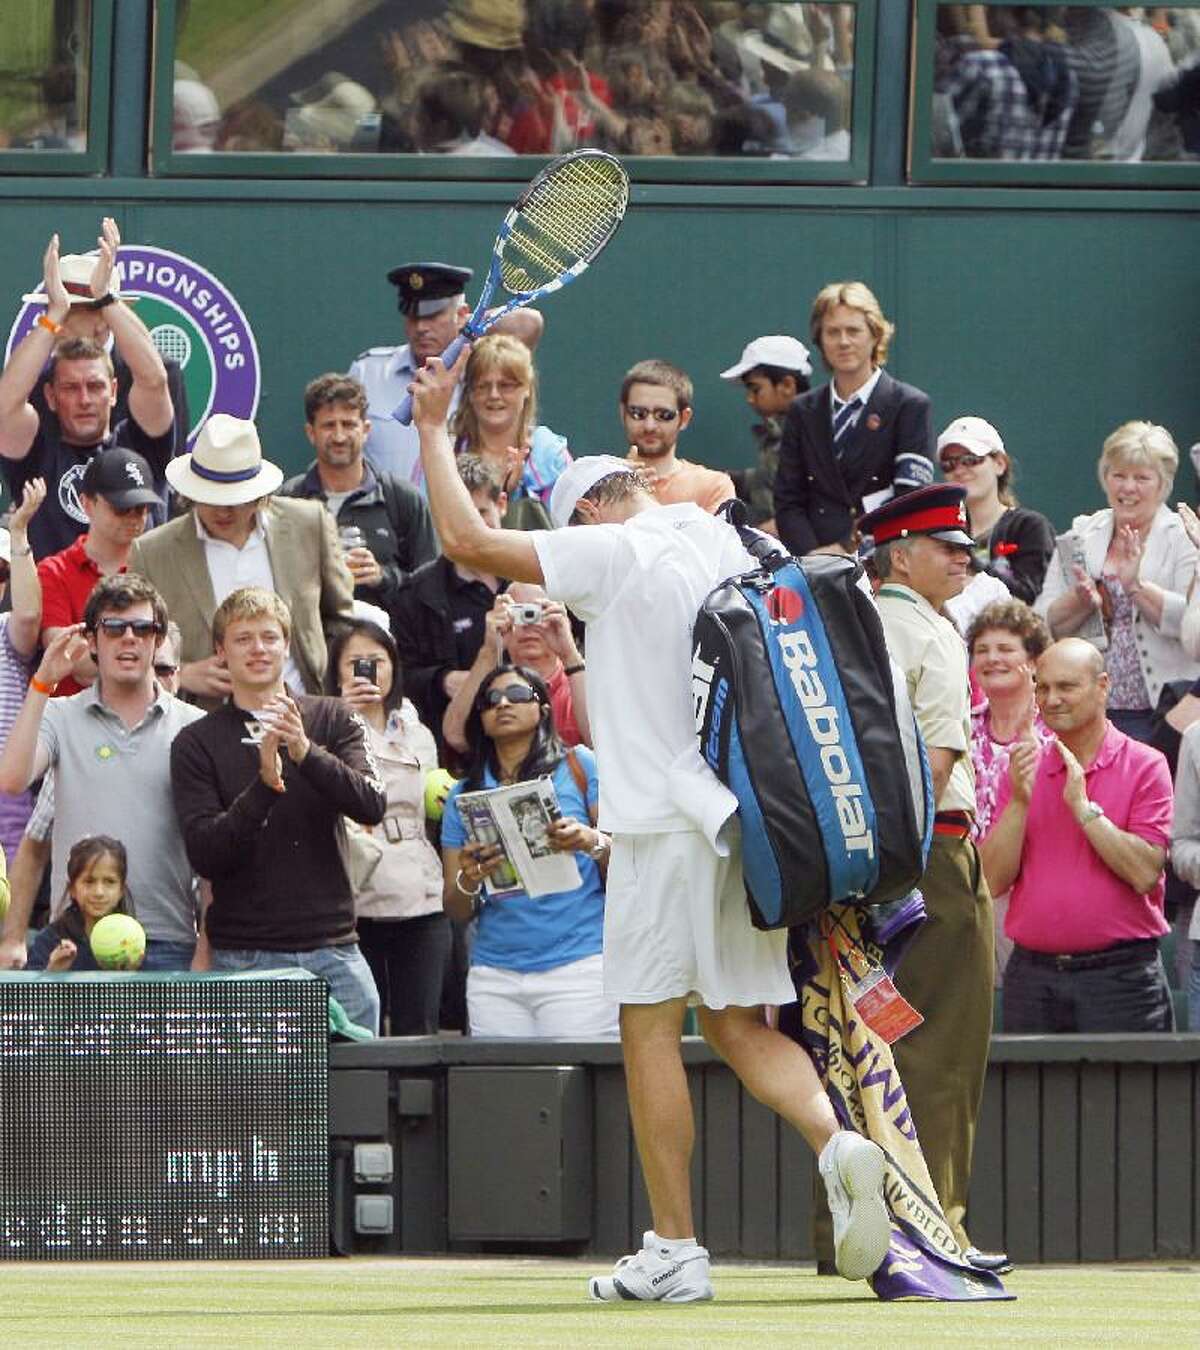 ASSOCIATED PRESS Andy Roddick waves goodbye as he leaves the court after being defeated by Spain's Feliciano Lopez at Wimbledon Friday.